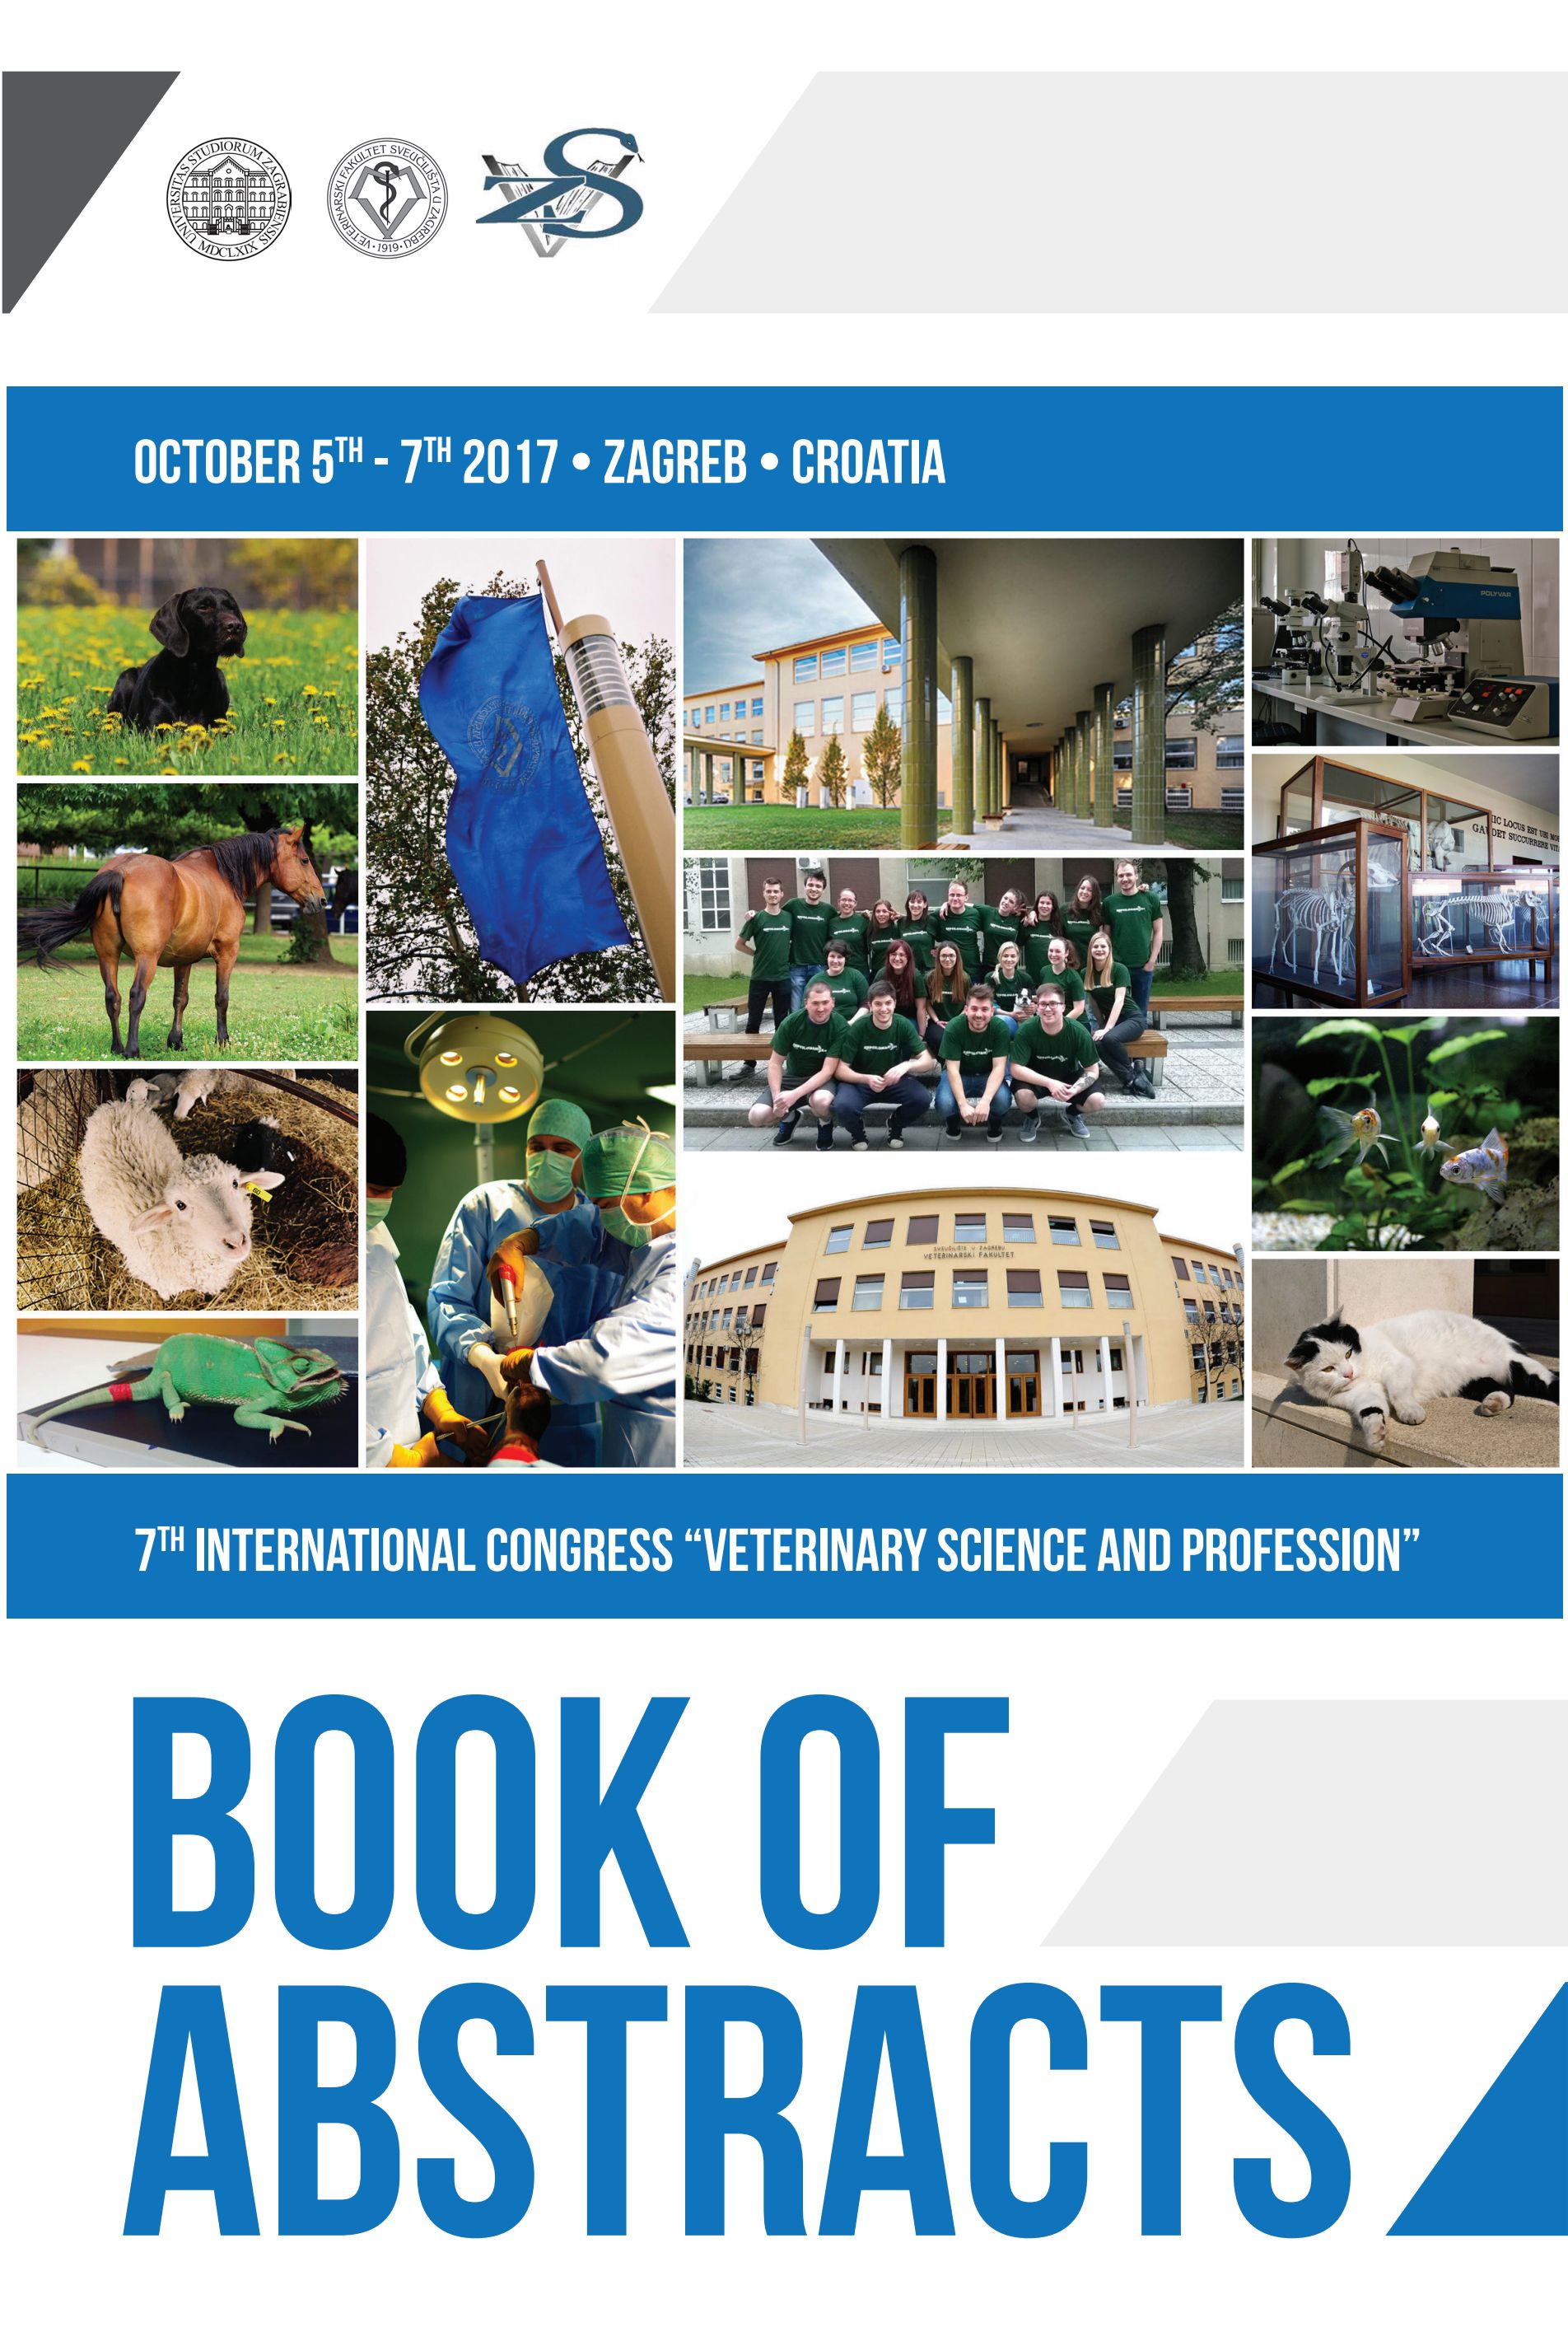 Book of abstracts of 7th international congress “Veterinary science and profession”